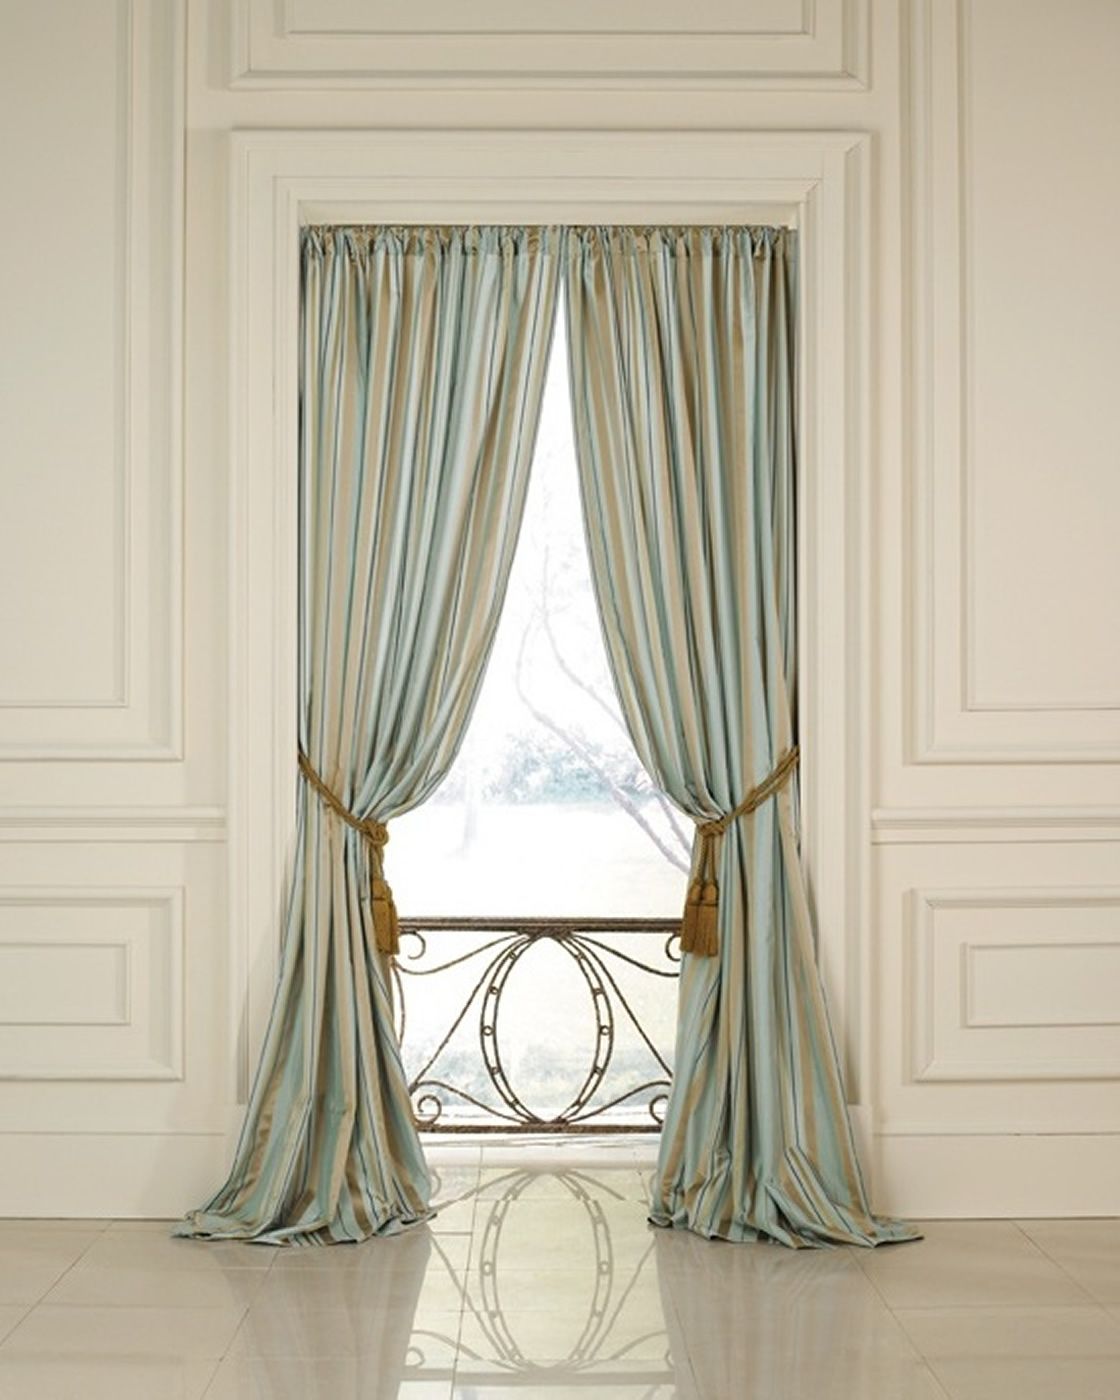 Choosing the curtain size